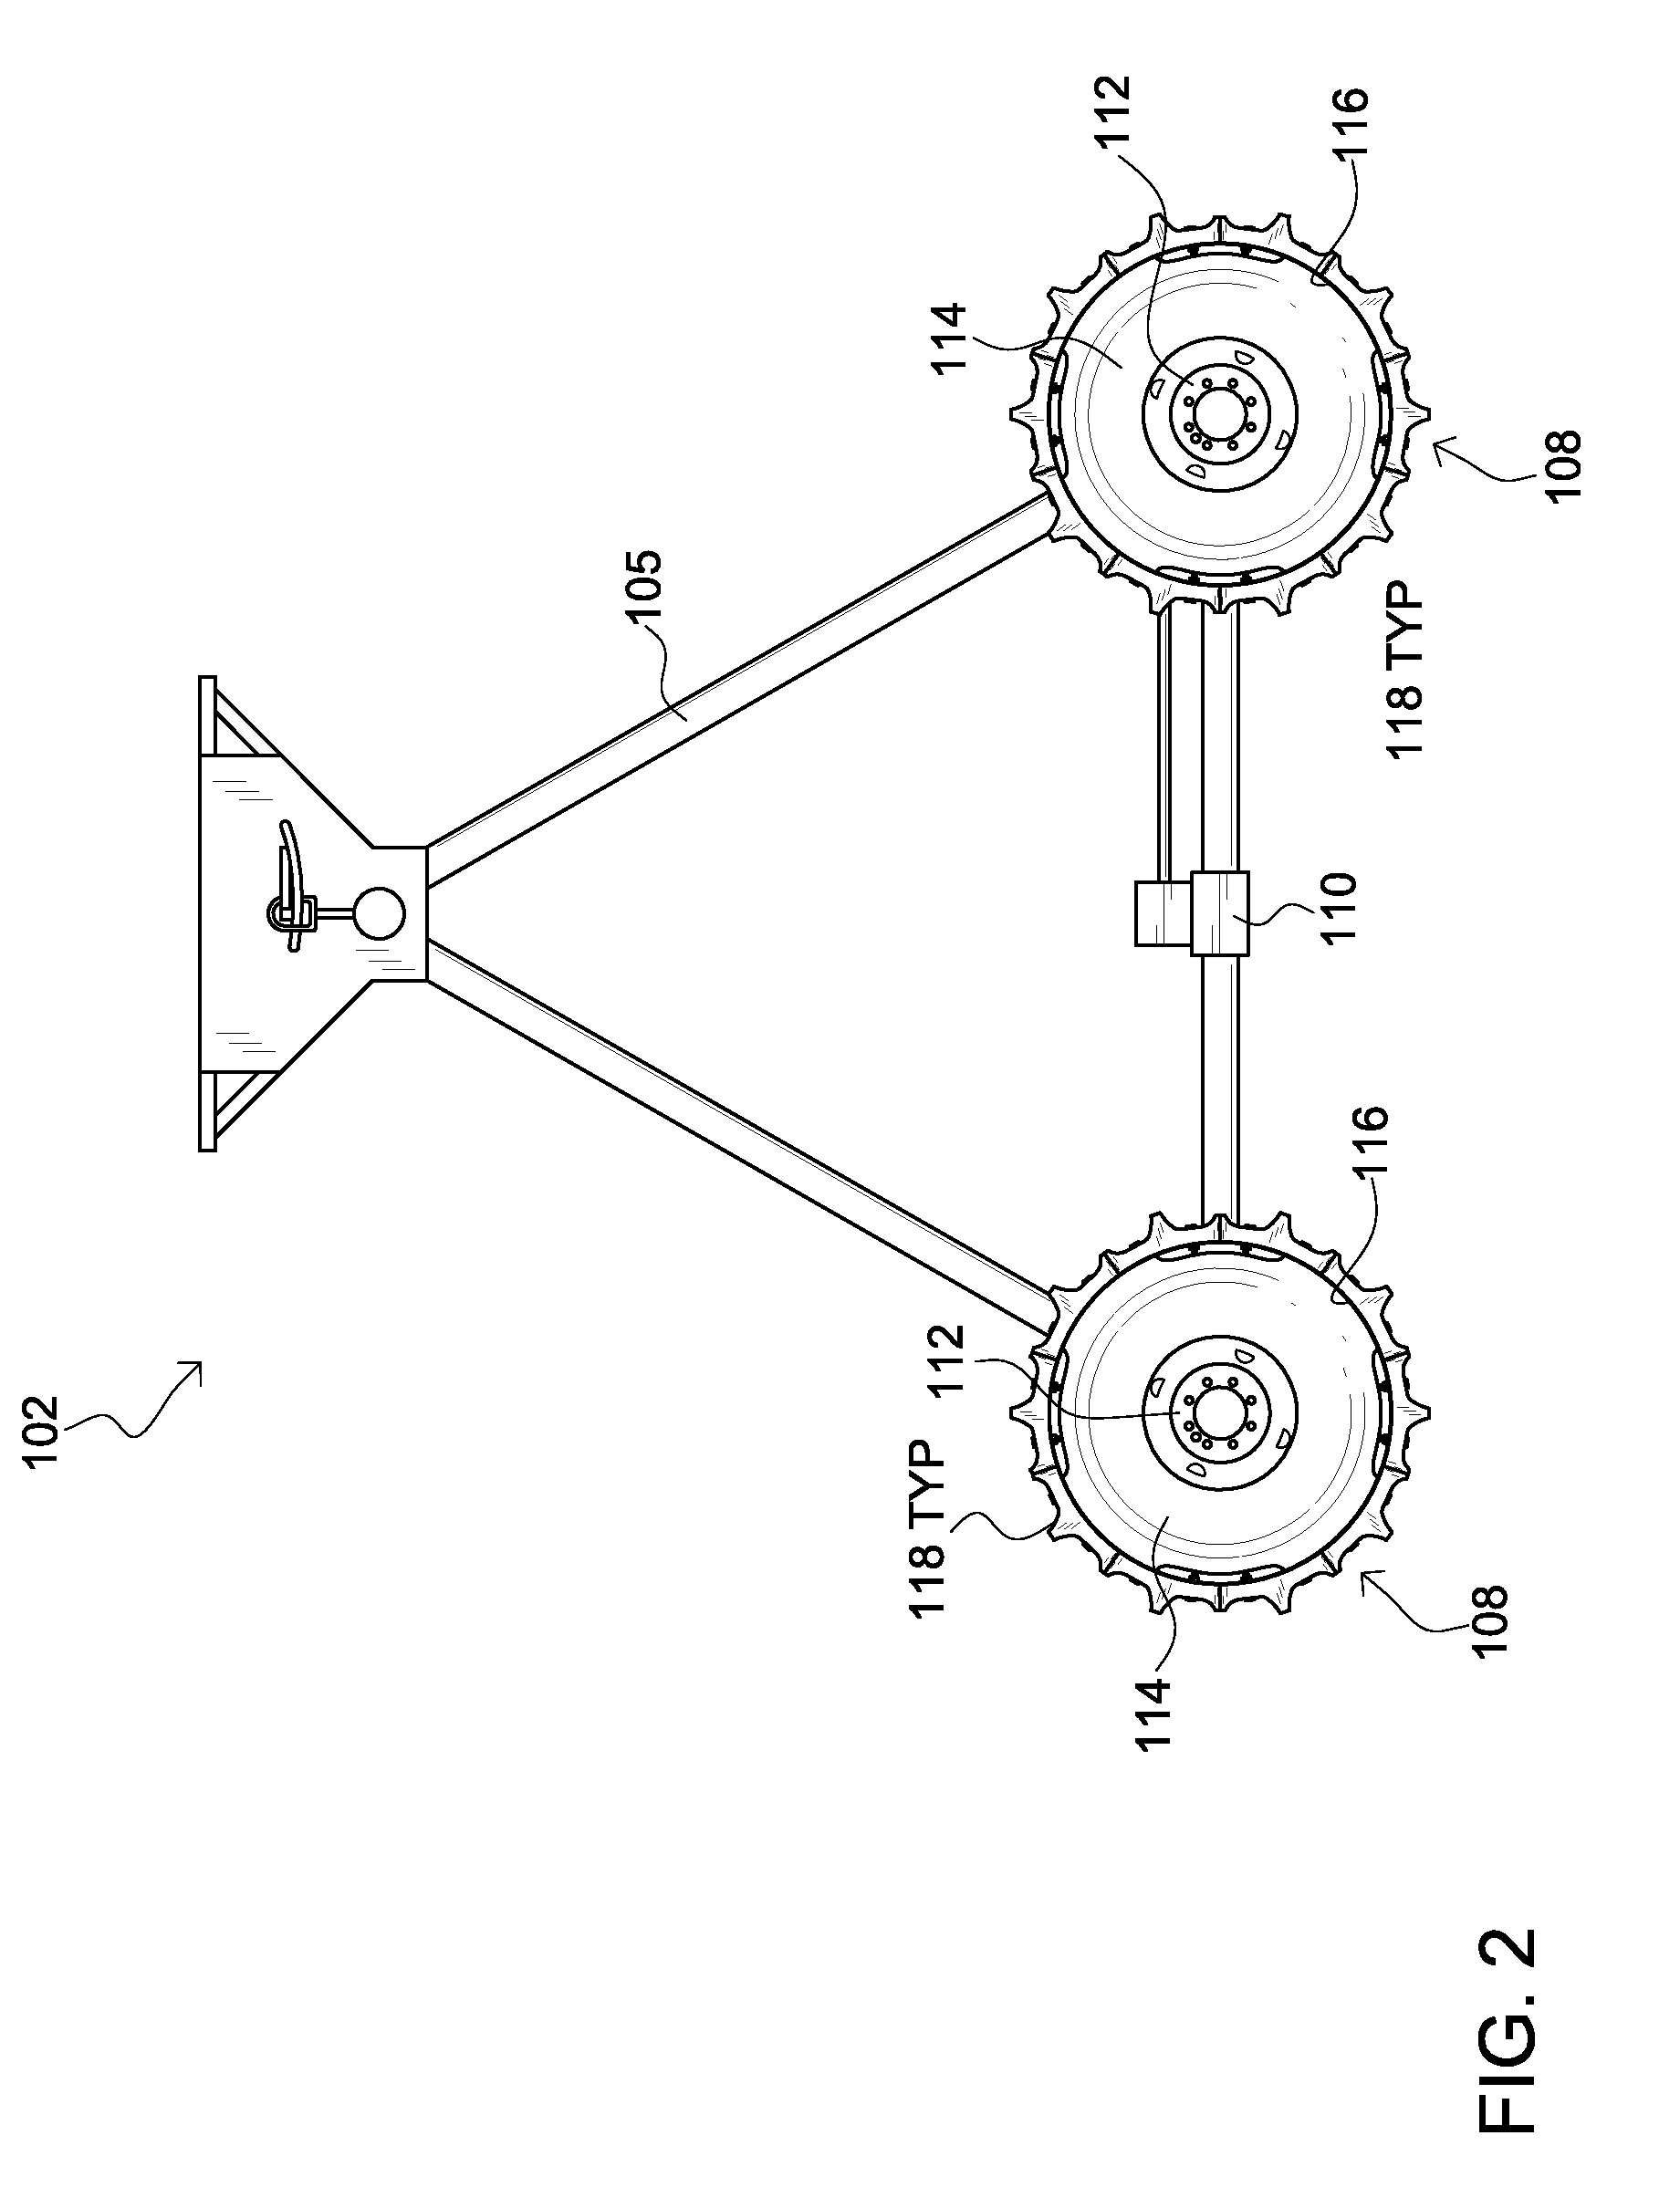 Non-Pneumatic Irrigation System Tower Support Wheel